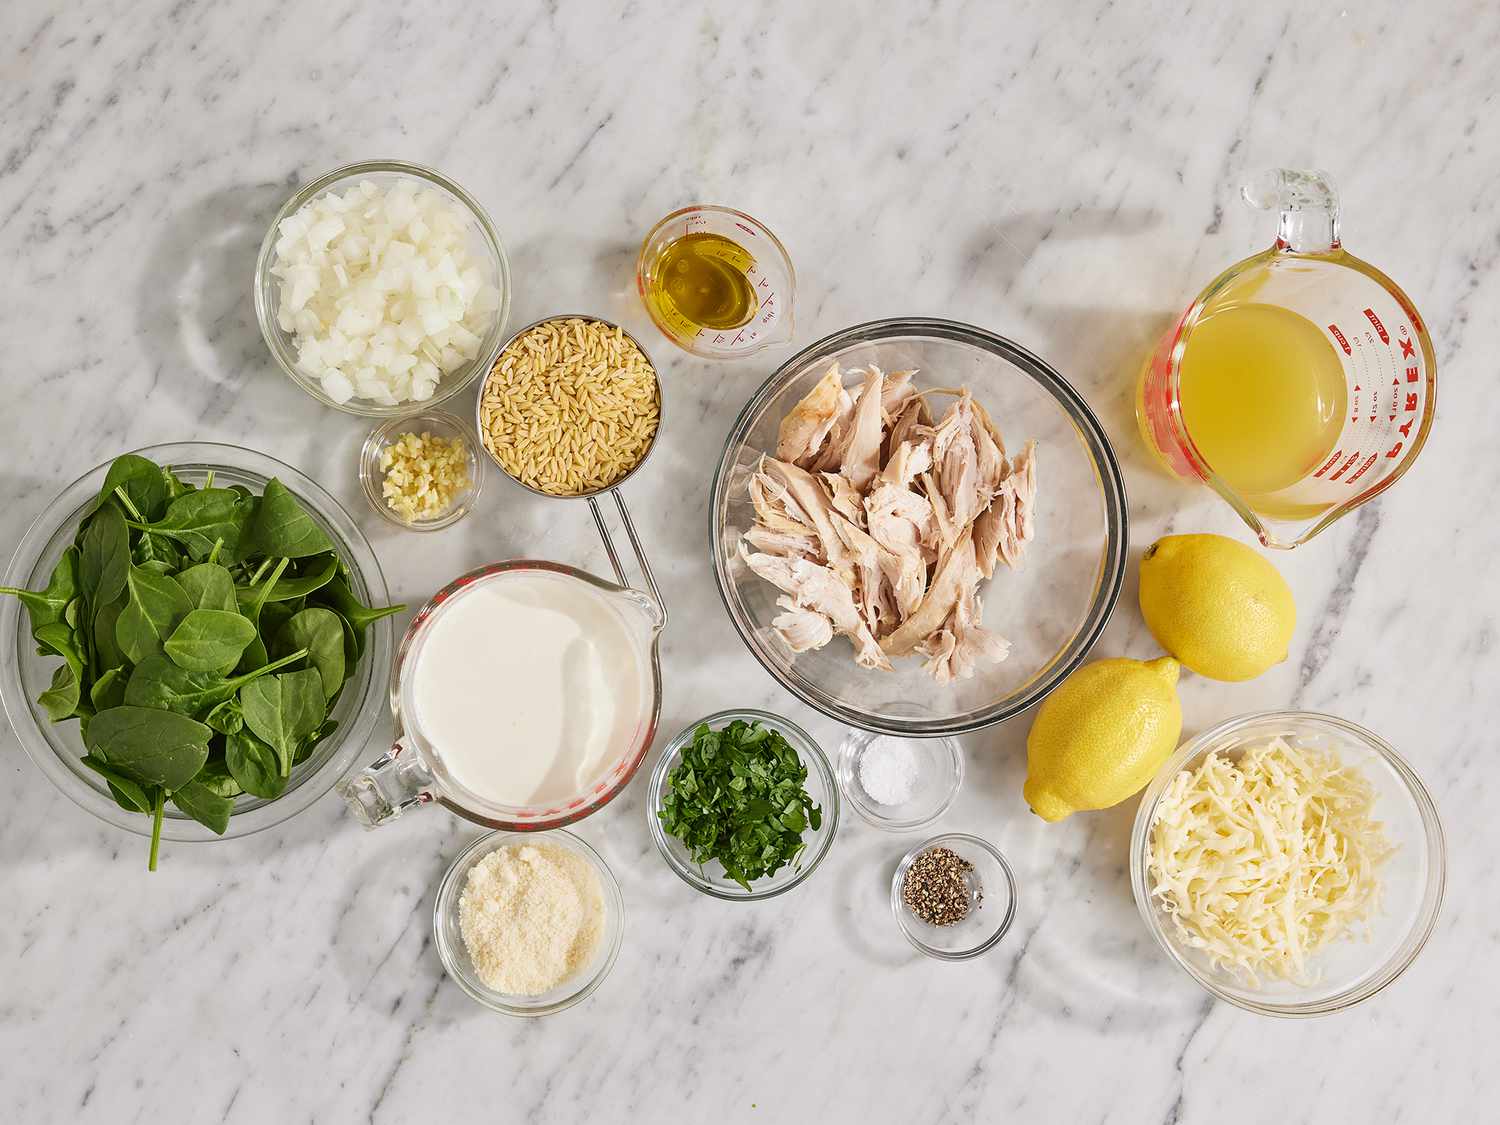 All ingredients gathered to make one pot lemon chicken orzo.